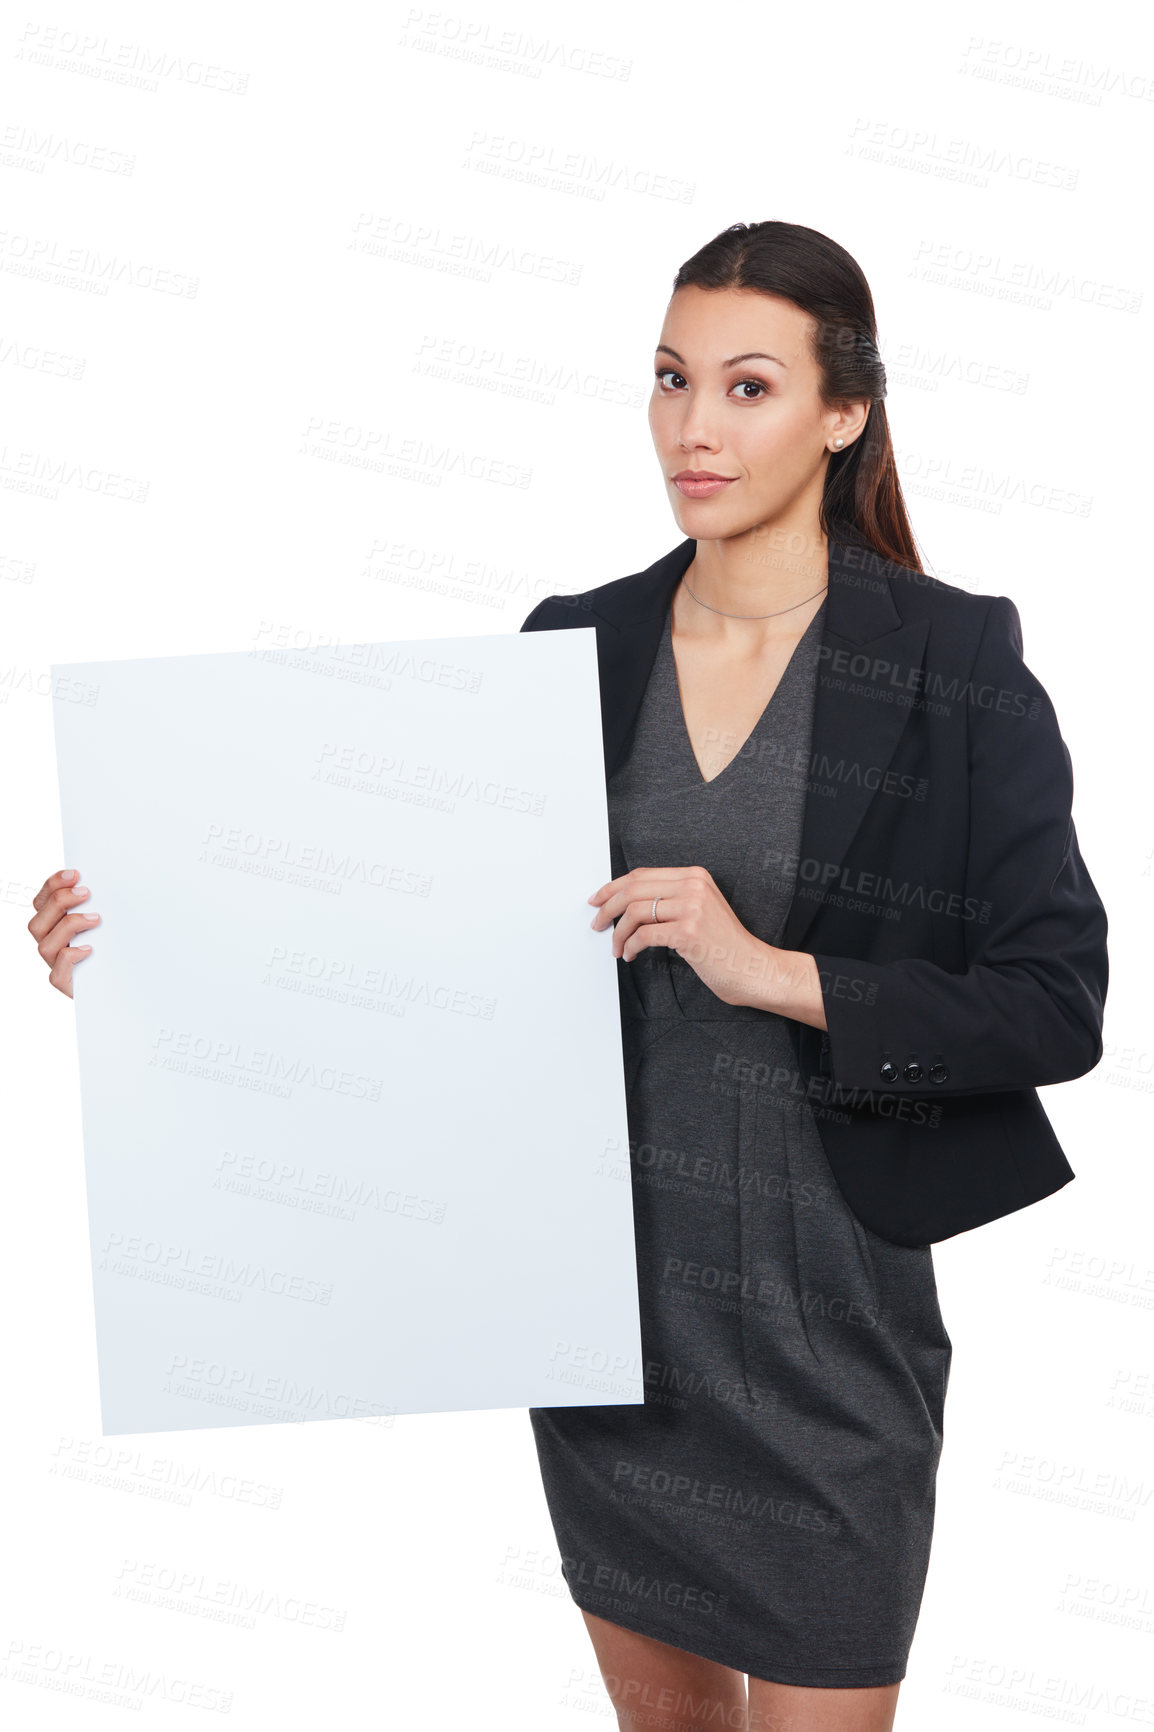 Buy stock photo Portrait of an attractive young businesswoman holding up a blank signboard